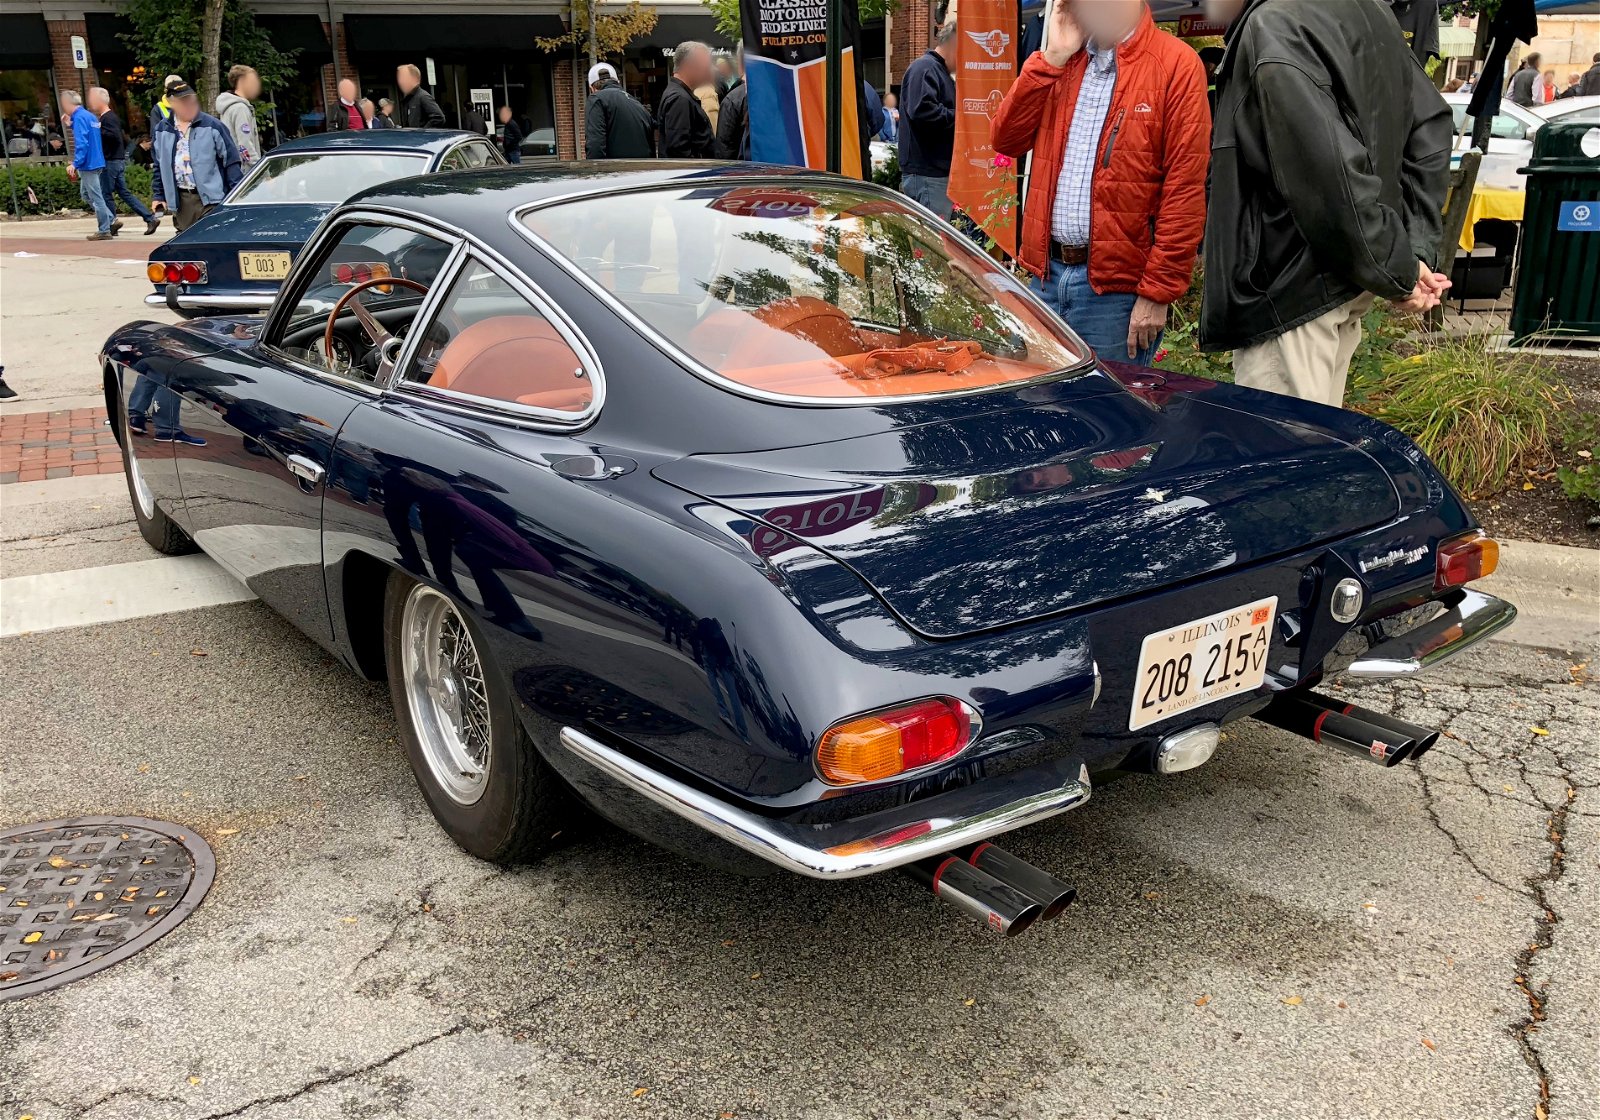 Watch the Photo by itslovesiss with the username @itslovesiss, posted on December 28, 2018 and the text says 'rosspetersen:
1964-1966 Lamborghini 350GT at Fuelfed Coffee and Classics in Winnetka, Illinois.


The 350GT was the first production Lamborghini.  Only 120 were built.  They were powered by 3.5 liter V12 engines that produced 284 horsepower (209 kW) and..'